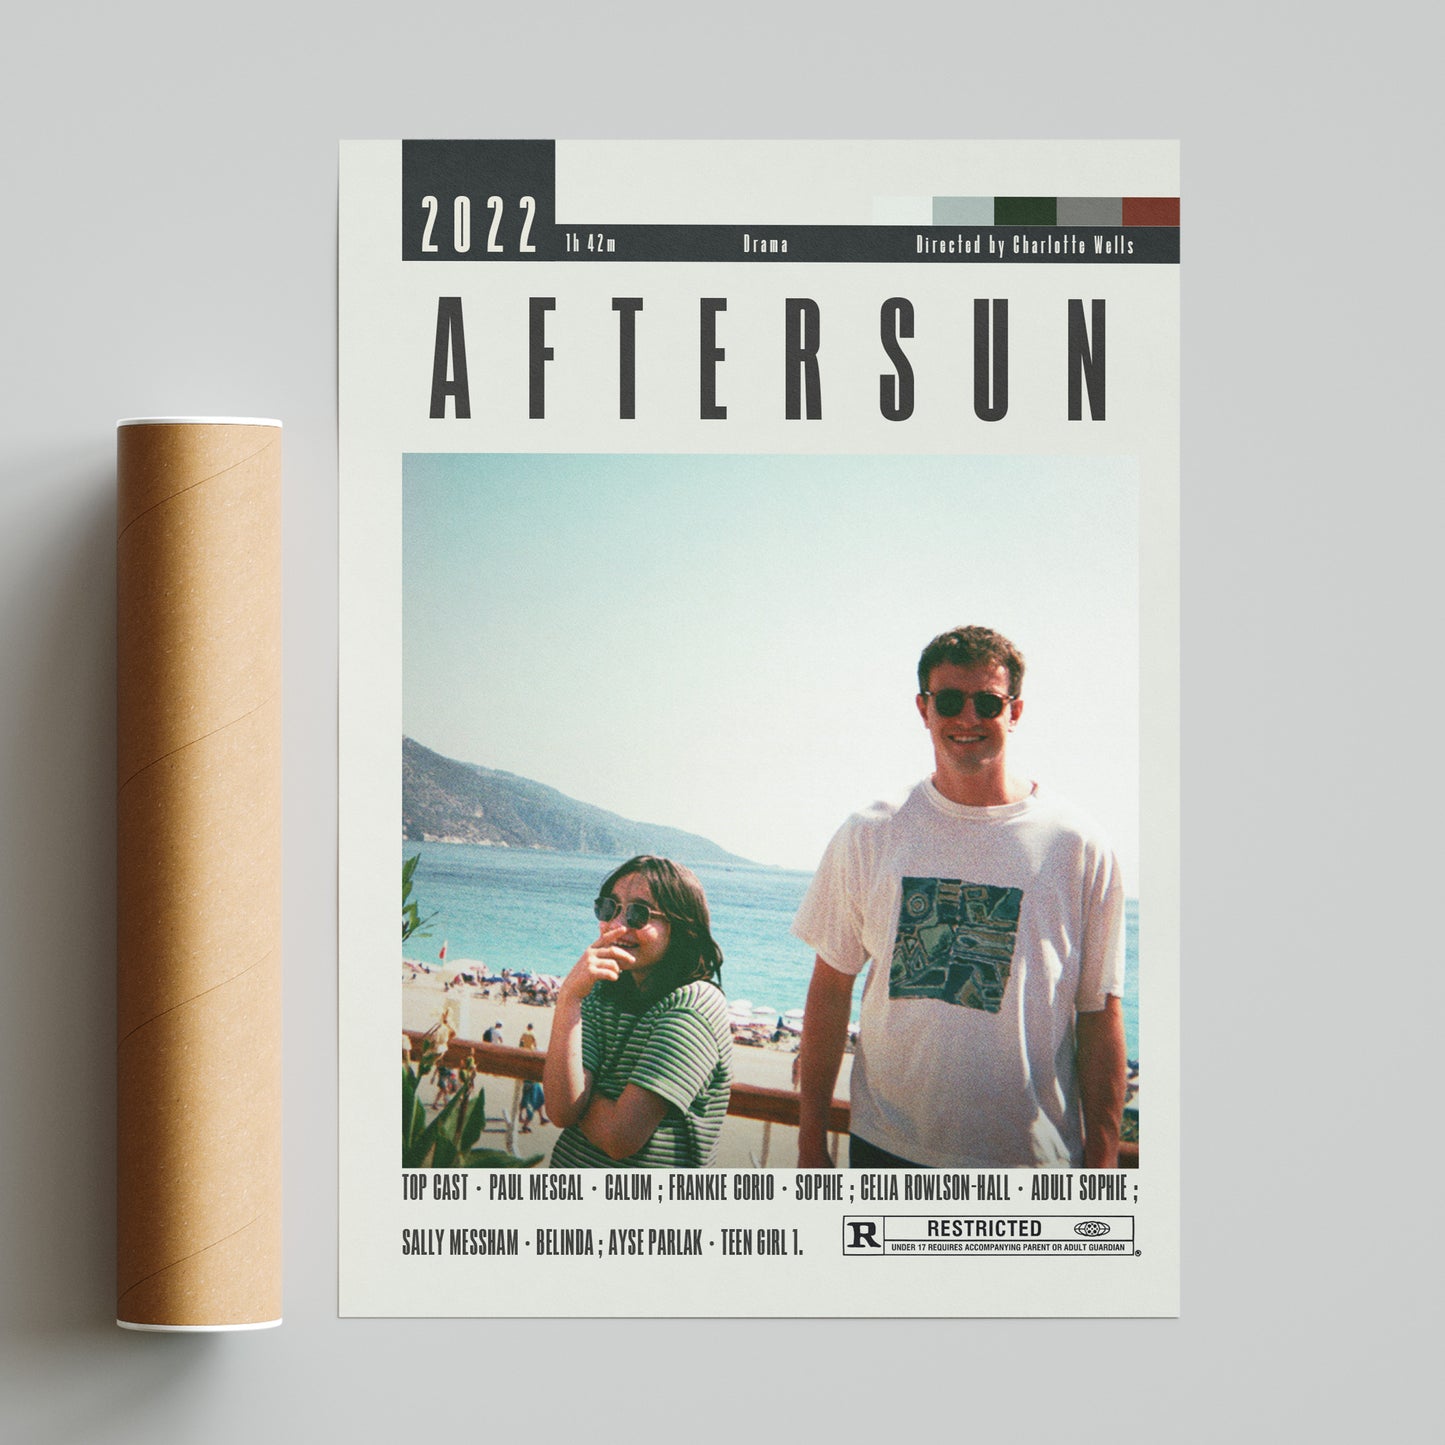 Upgrade your movie poster collection with our Aftersun Poster featuring 98 movie types. Customizable and minimalist, this vintage retro art print is available in sizes from A6 to A3. Showcase your love for cinema with our top cast, duration, director, and most famous scene. Your walls will thank you.